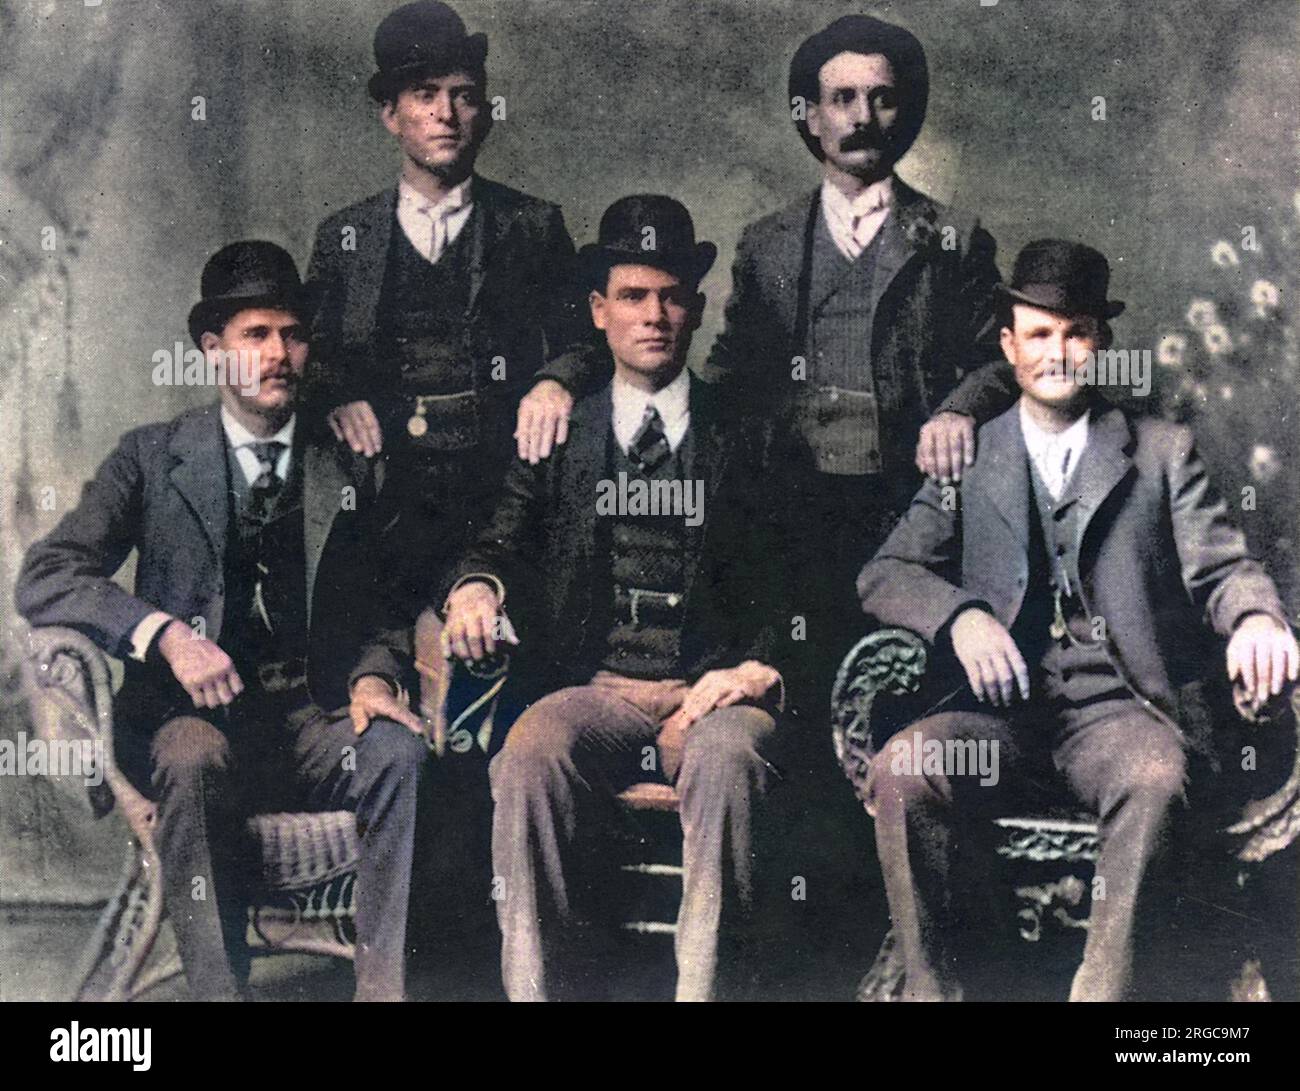 Members of The Wild Bunch in Fort Worth, Texas: sitting (l to r): Harry A Longabaugh, alias the Sundance Kid, Ben Kilpatrick, alias the Tall Texan, Robert Leroy Parker, alias Butch Cassidy; Standing (l to r): Will Carver, alias News Carver and Harvey Logan, alias Kid Curry. Stock Photo